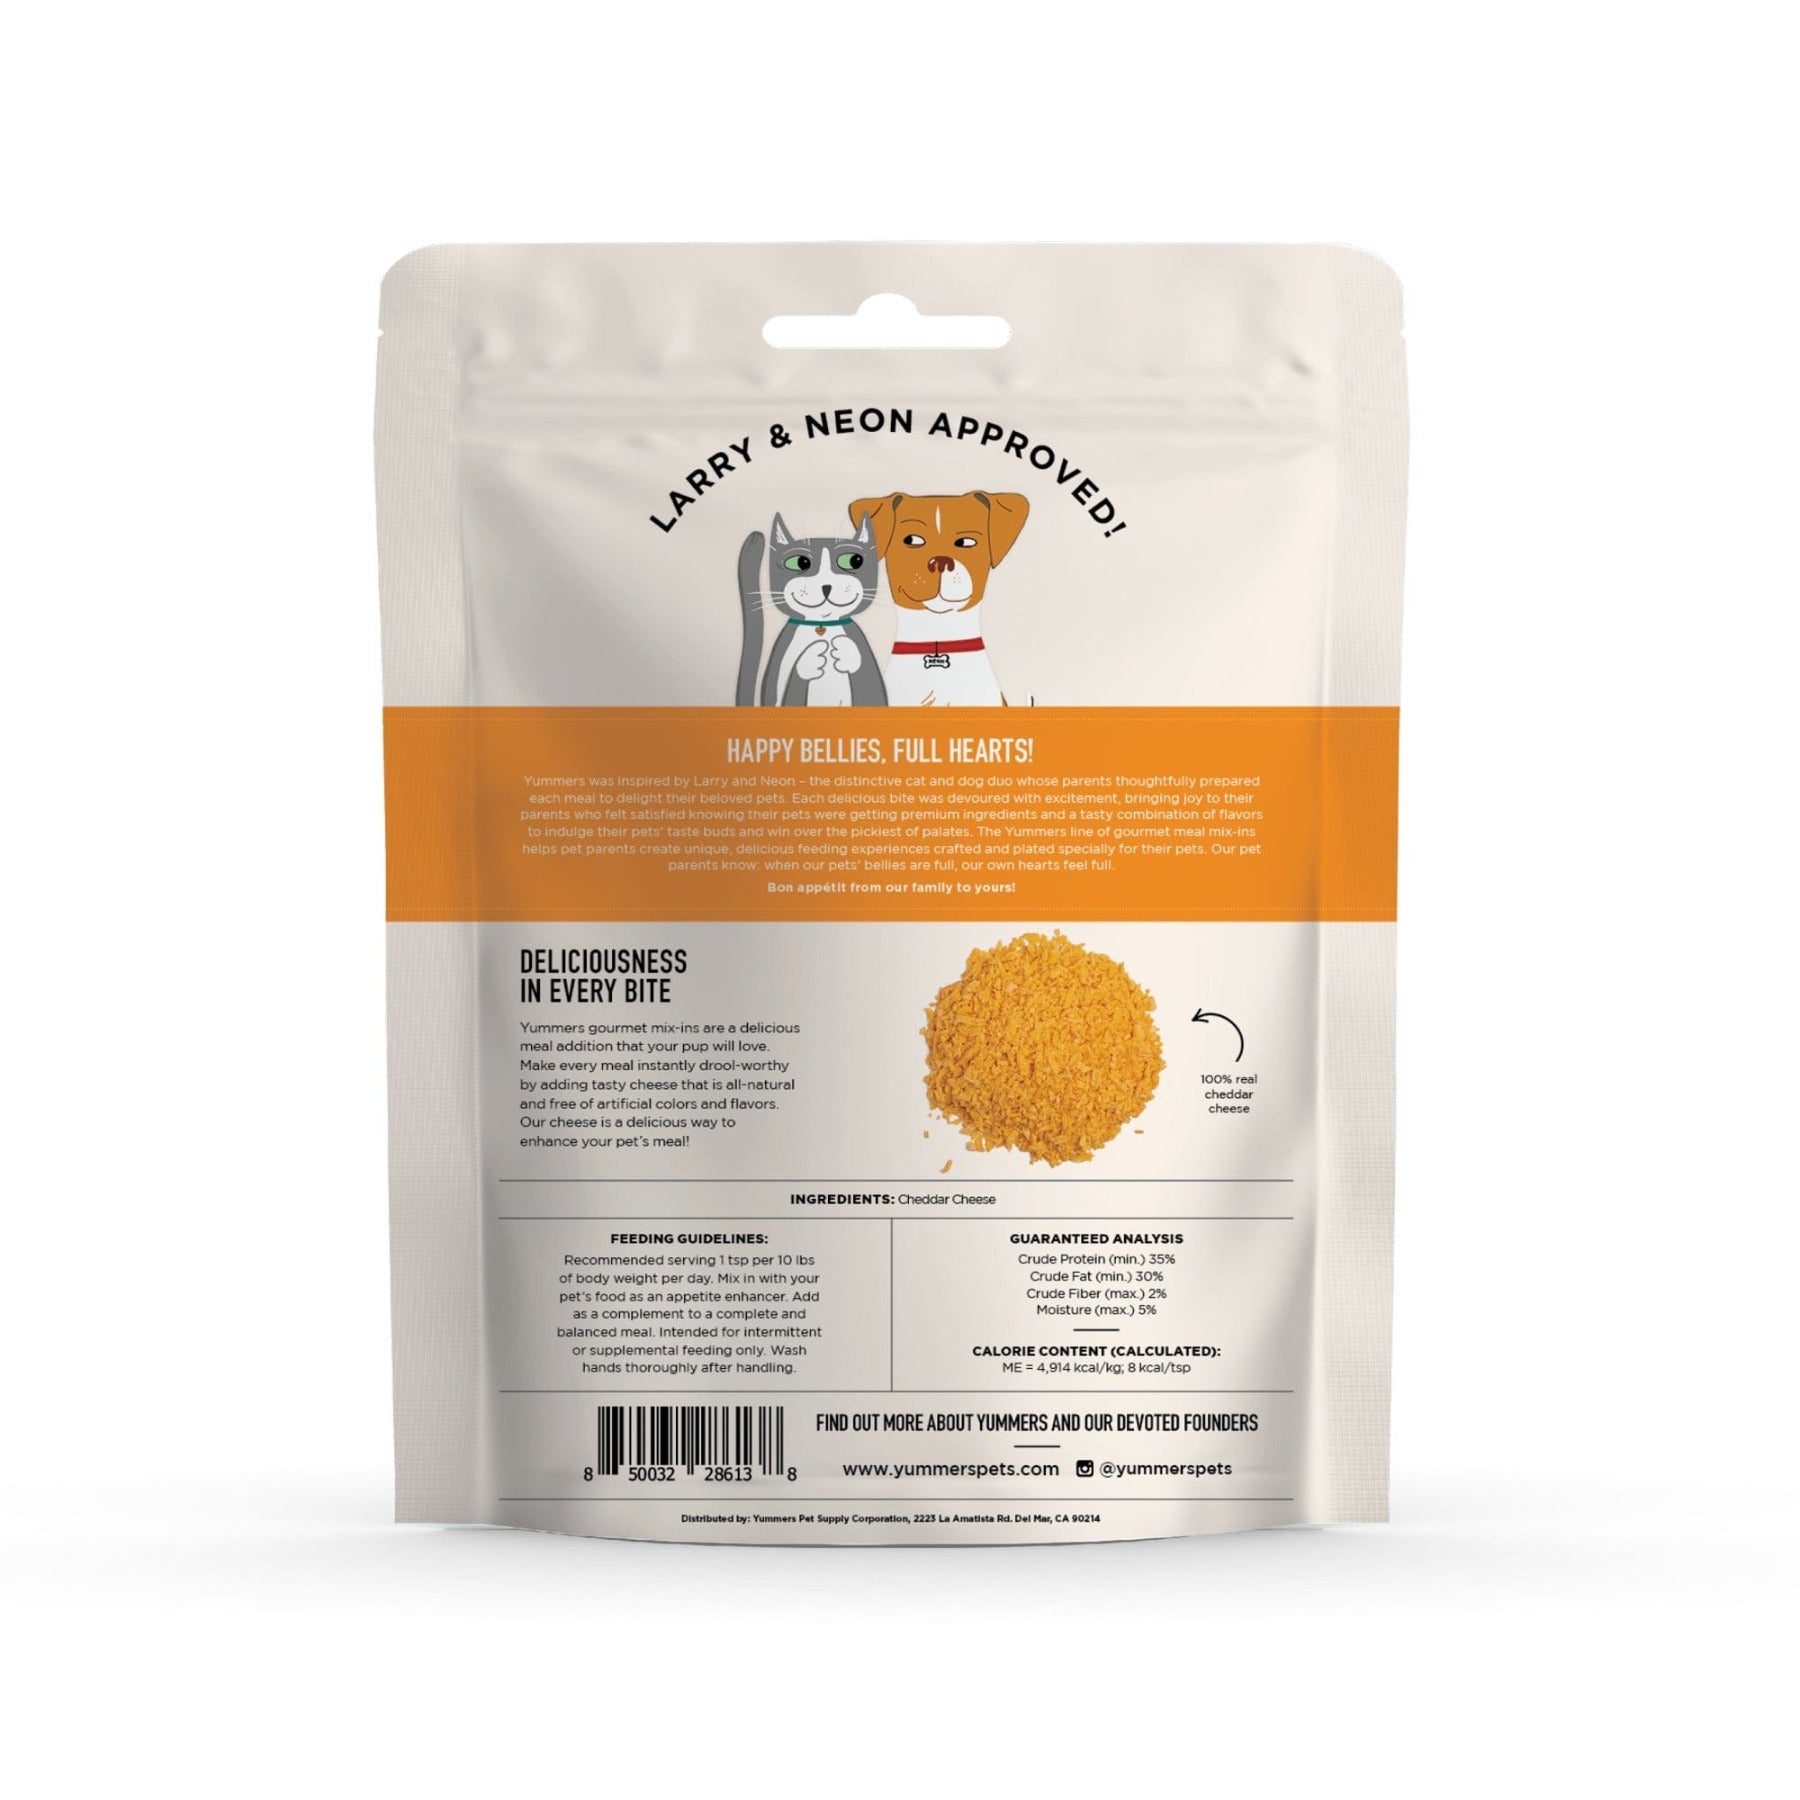 Freeze-dried Cheddar Cheese Gourmet Meal Mix-in for Dogs, 2.5 oz. - back